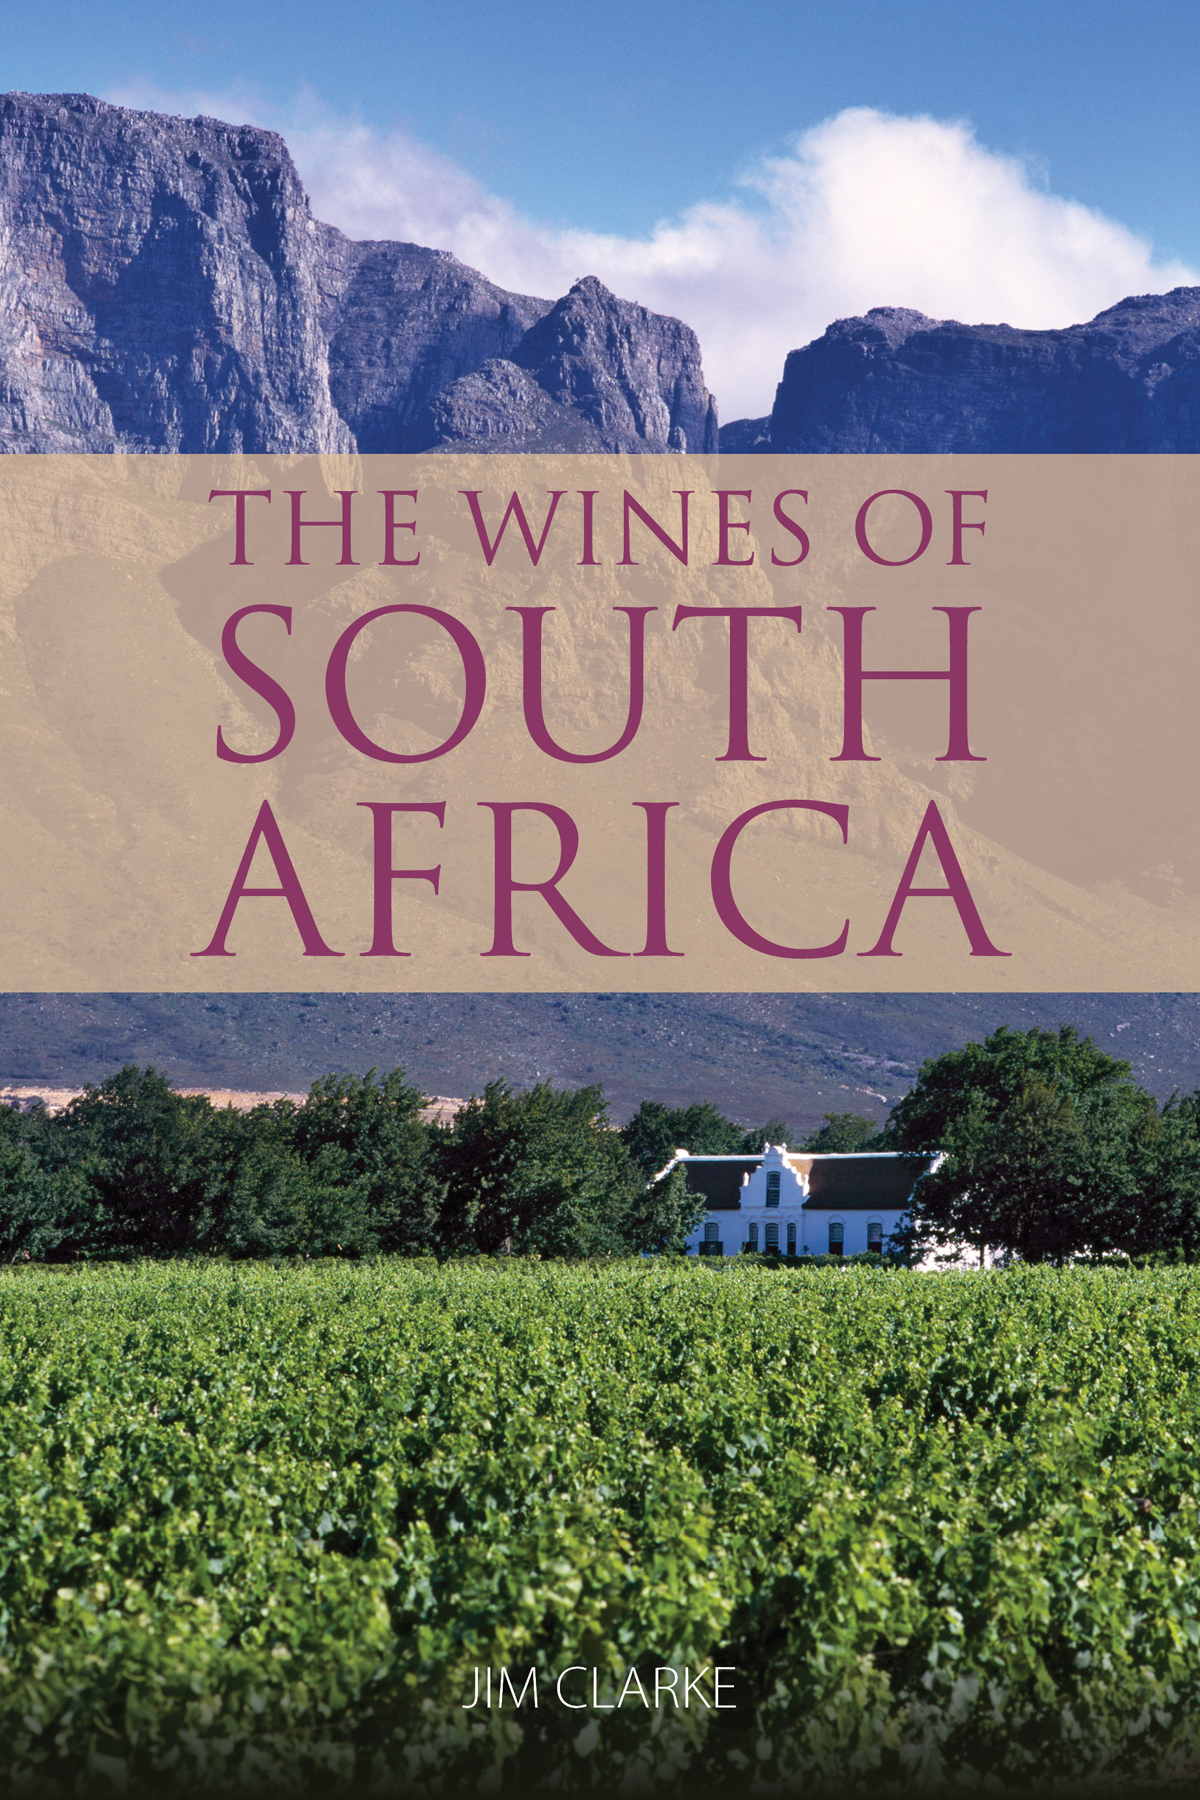 Extract: The wines of South Africa by Jim Clarke